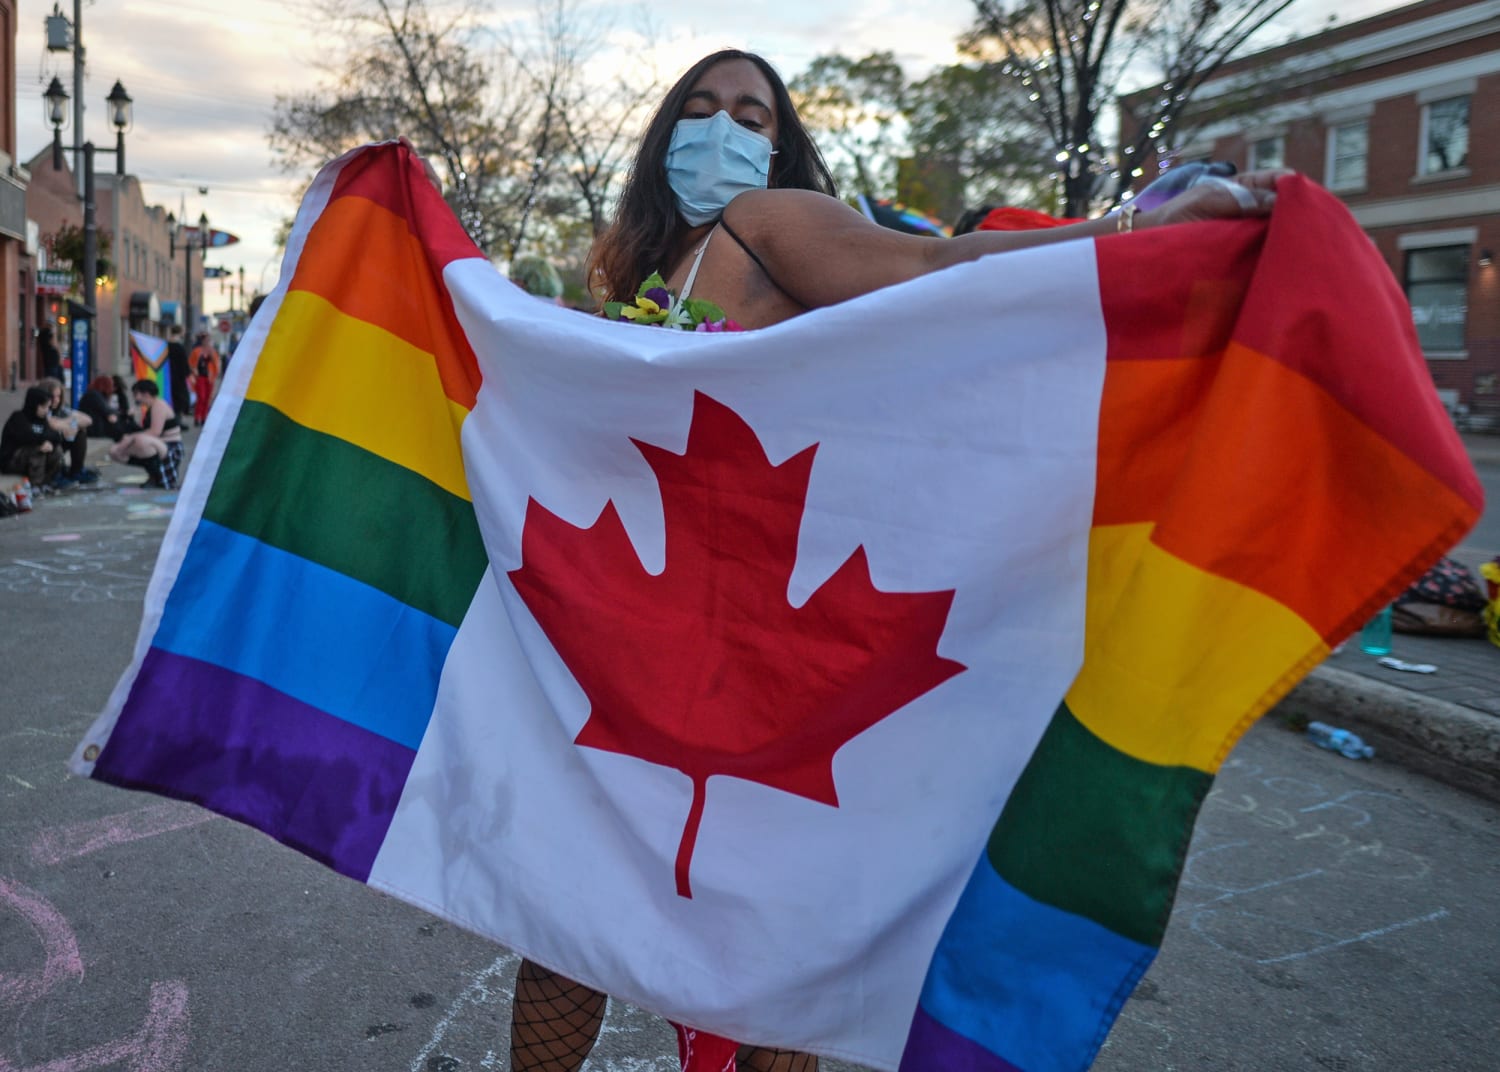 Canada bans conversion therapy, joining a handful of other nations